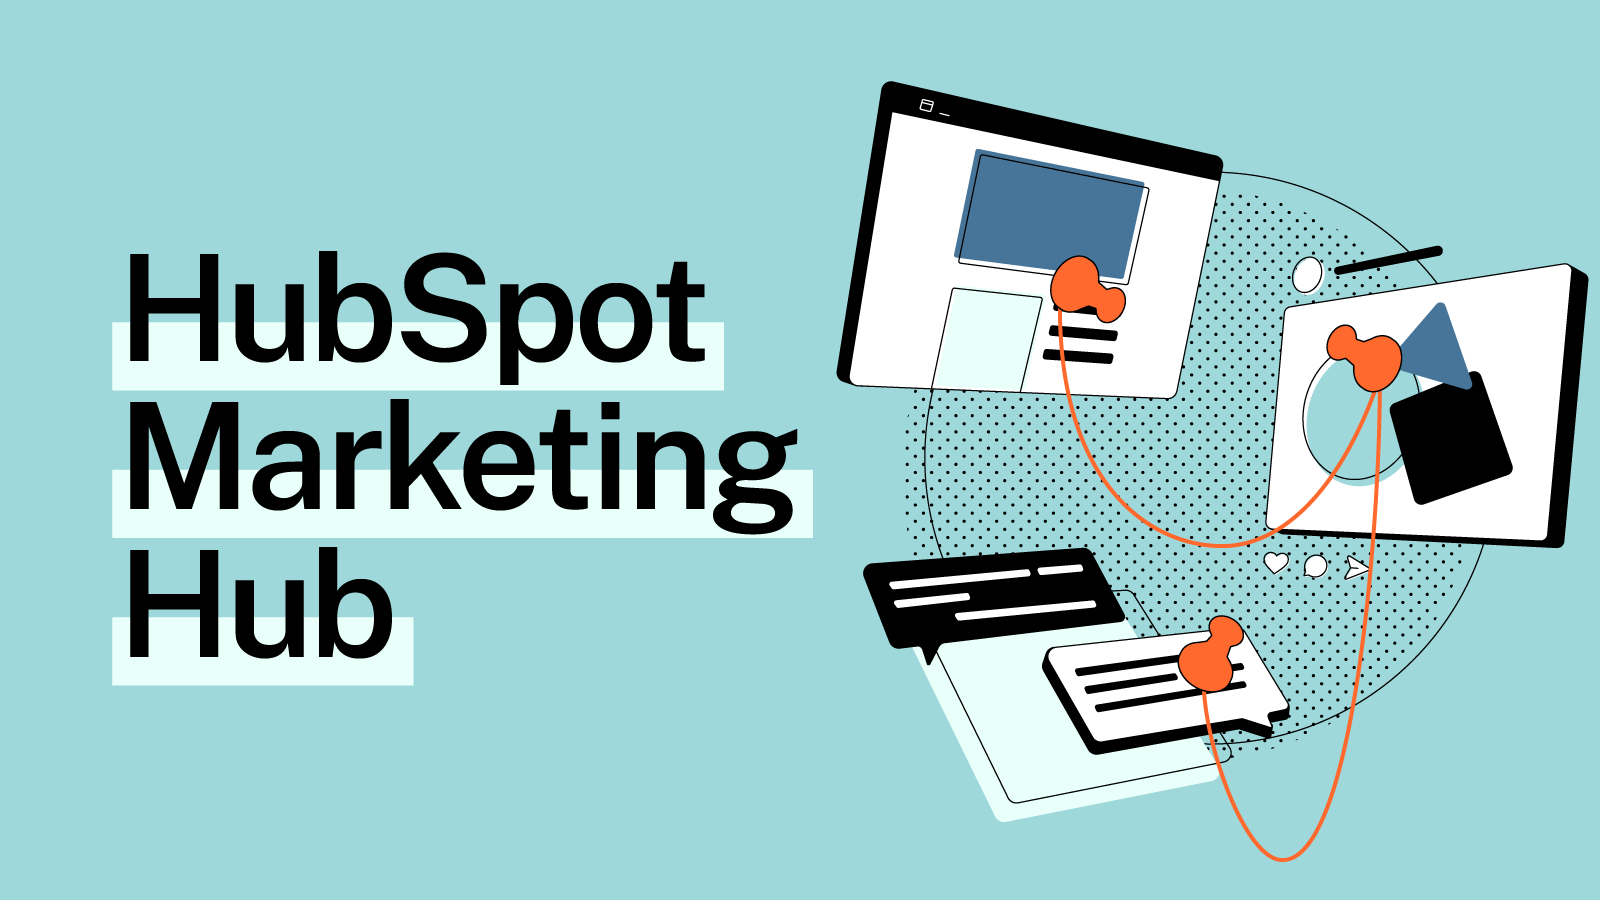 How to Use HubSpot Marketing Hub to Grow Your Nonprofit